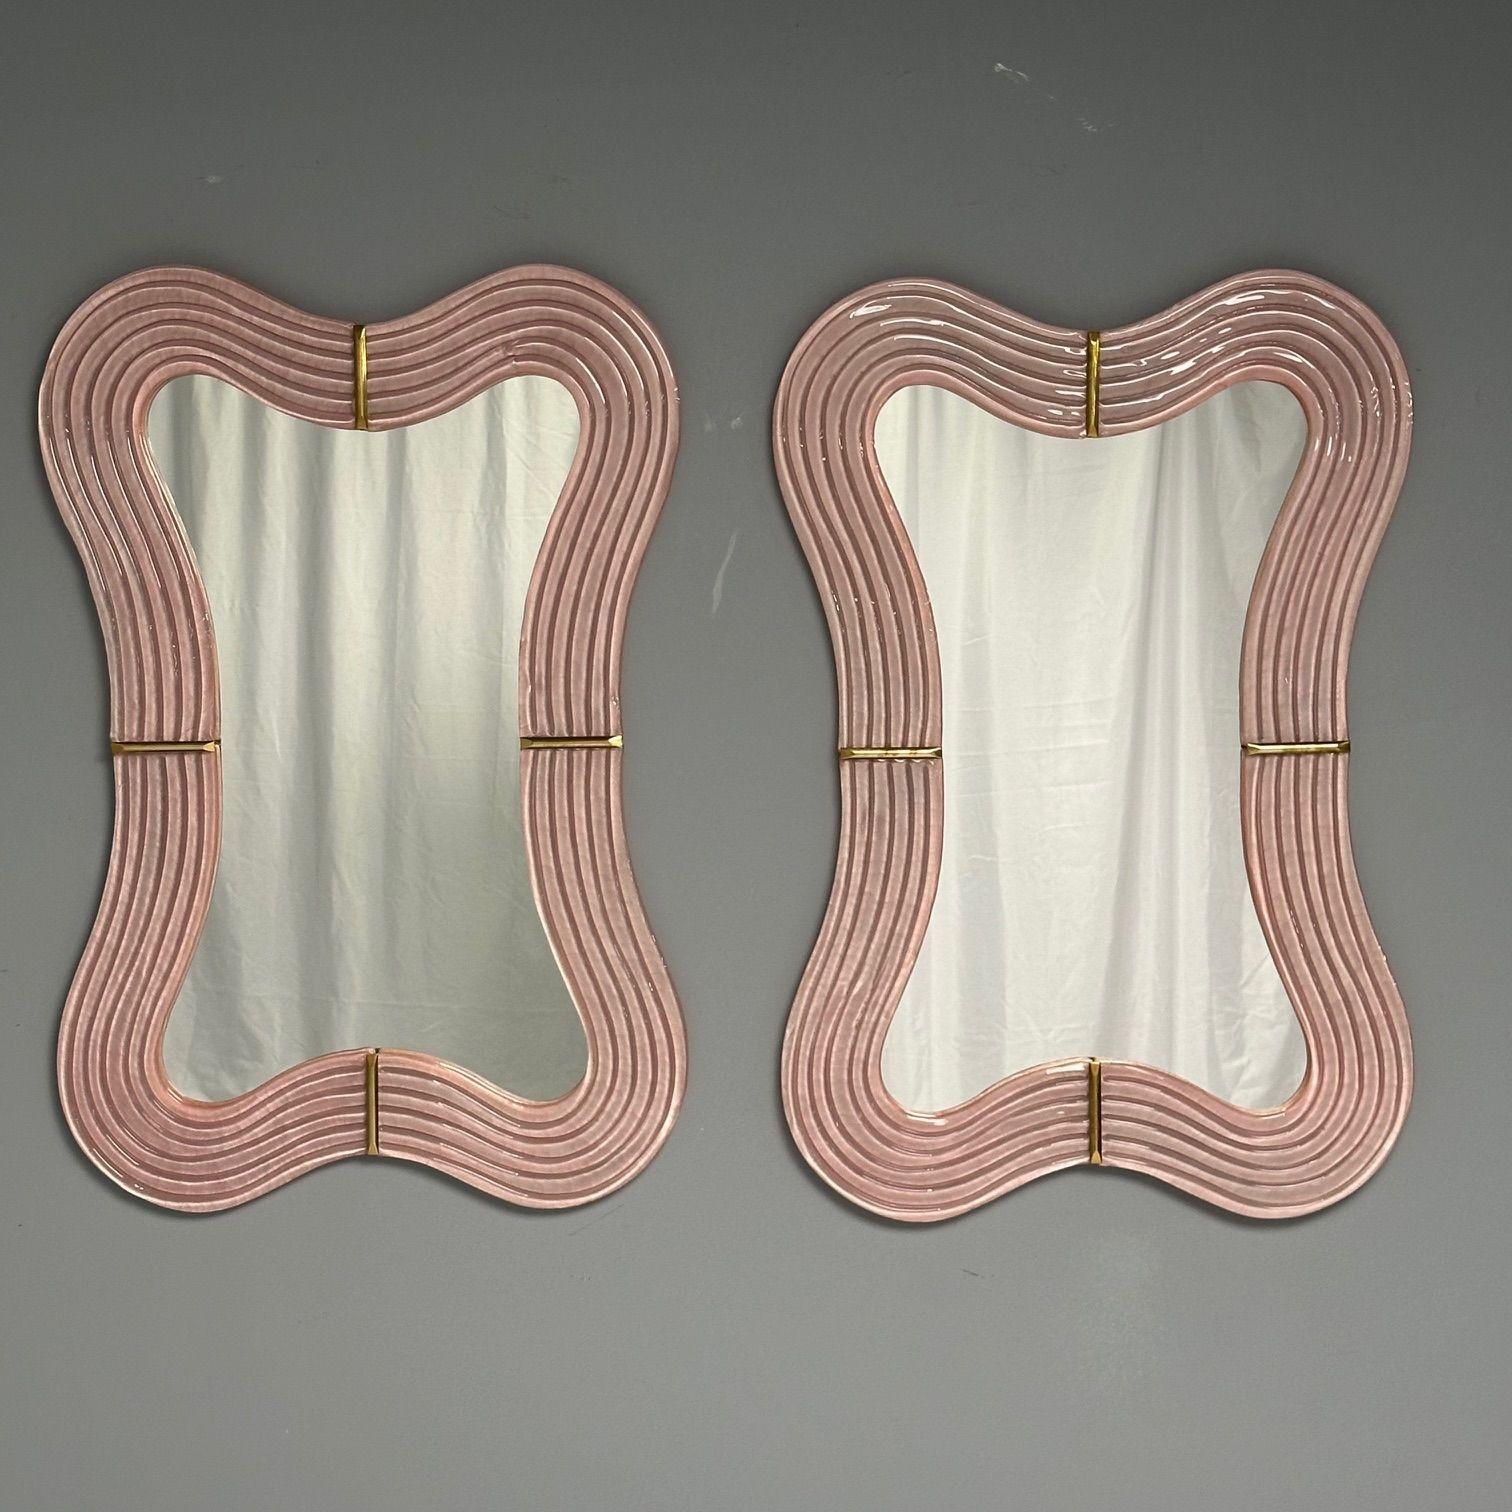 Contemporary, Wavy Wall Mirrors, Pink Murano Glass, Brass, Italy, 2023

Pair of rectangular wall mirrors designed and handcrafted in a small workshop in Venice, Italy. Each mirror has a wavy pink Murano glass frame and holes on the back to be hung